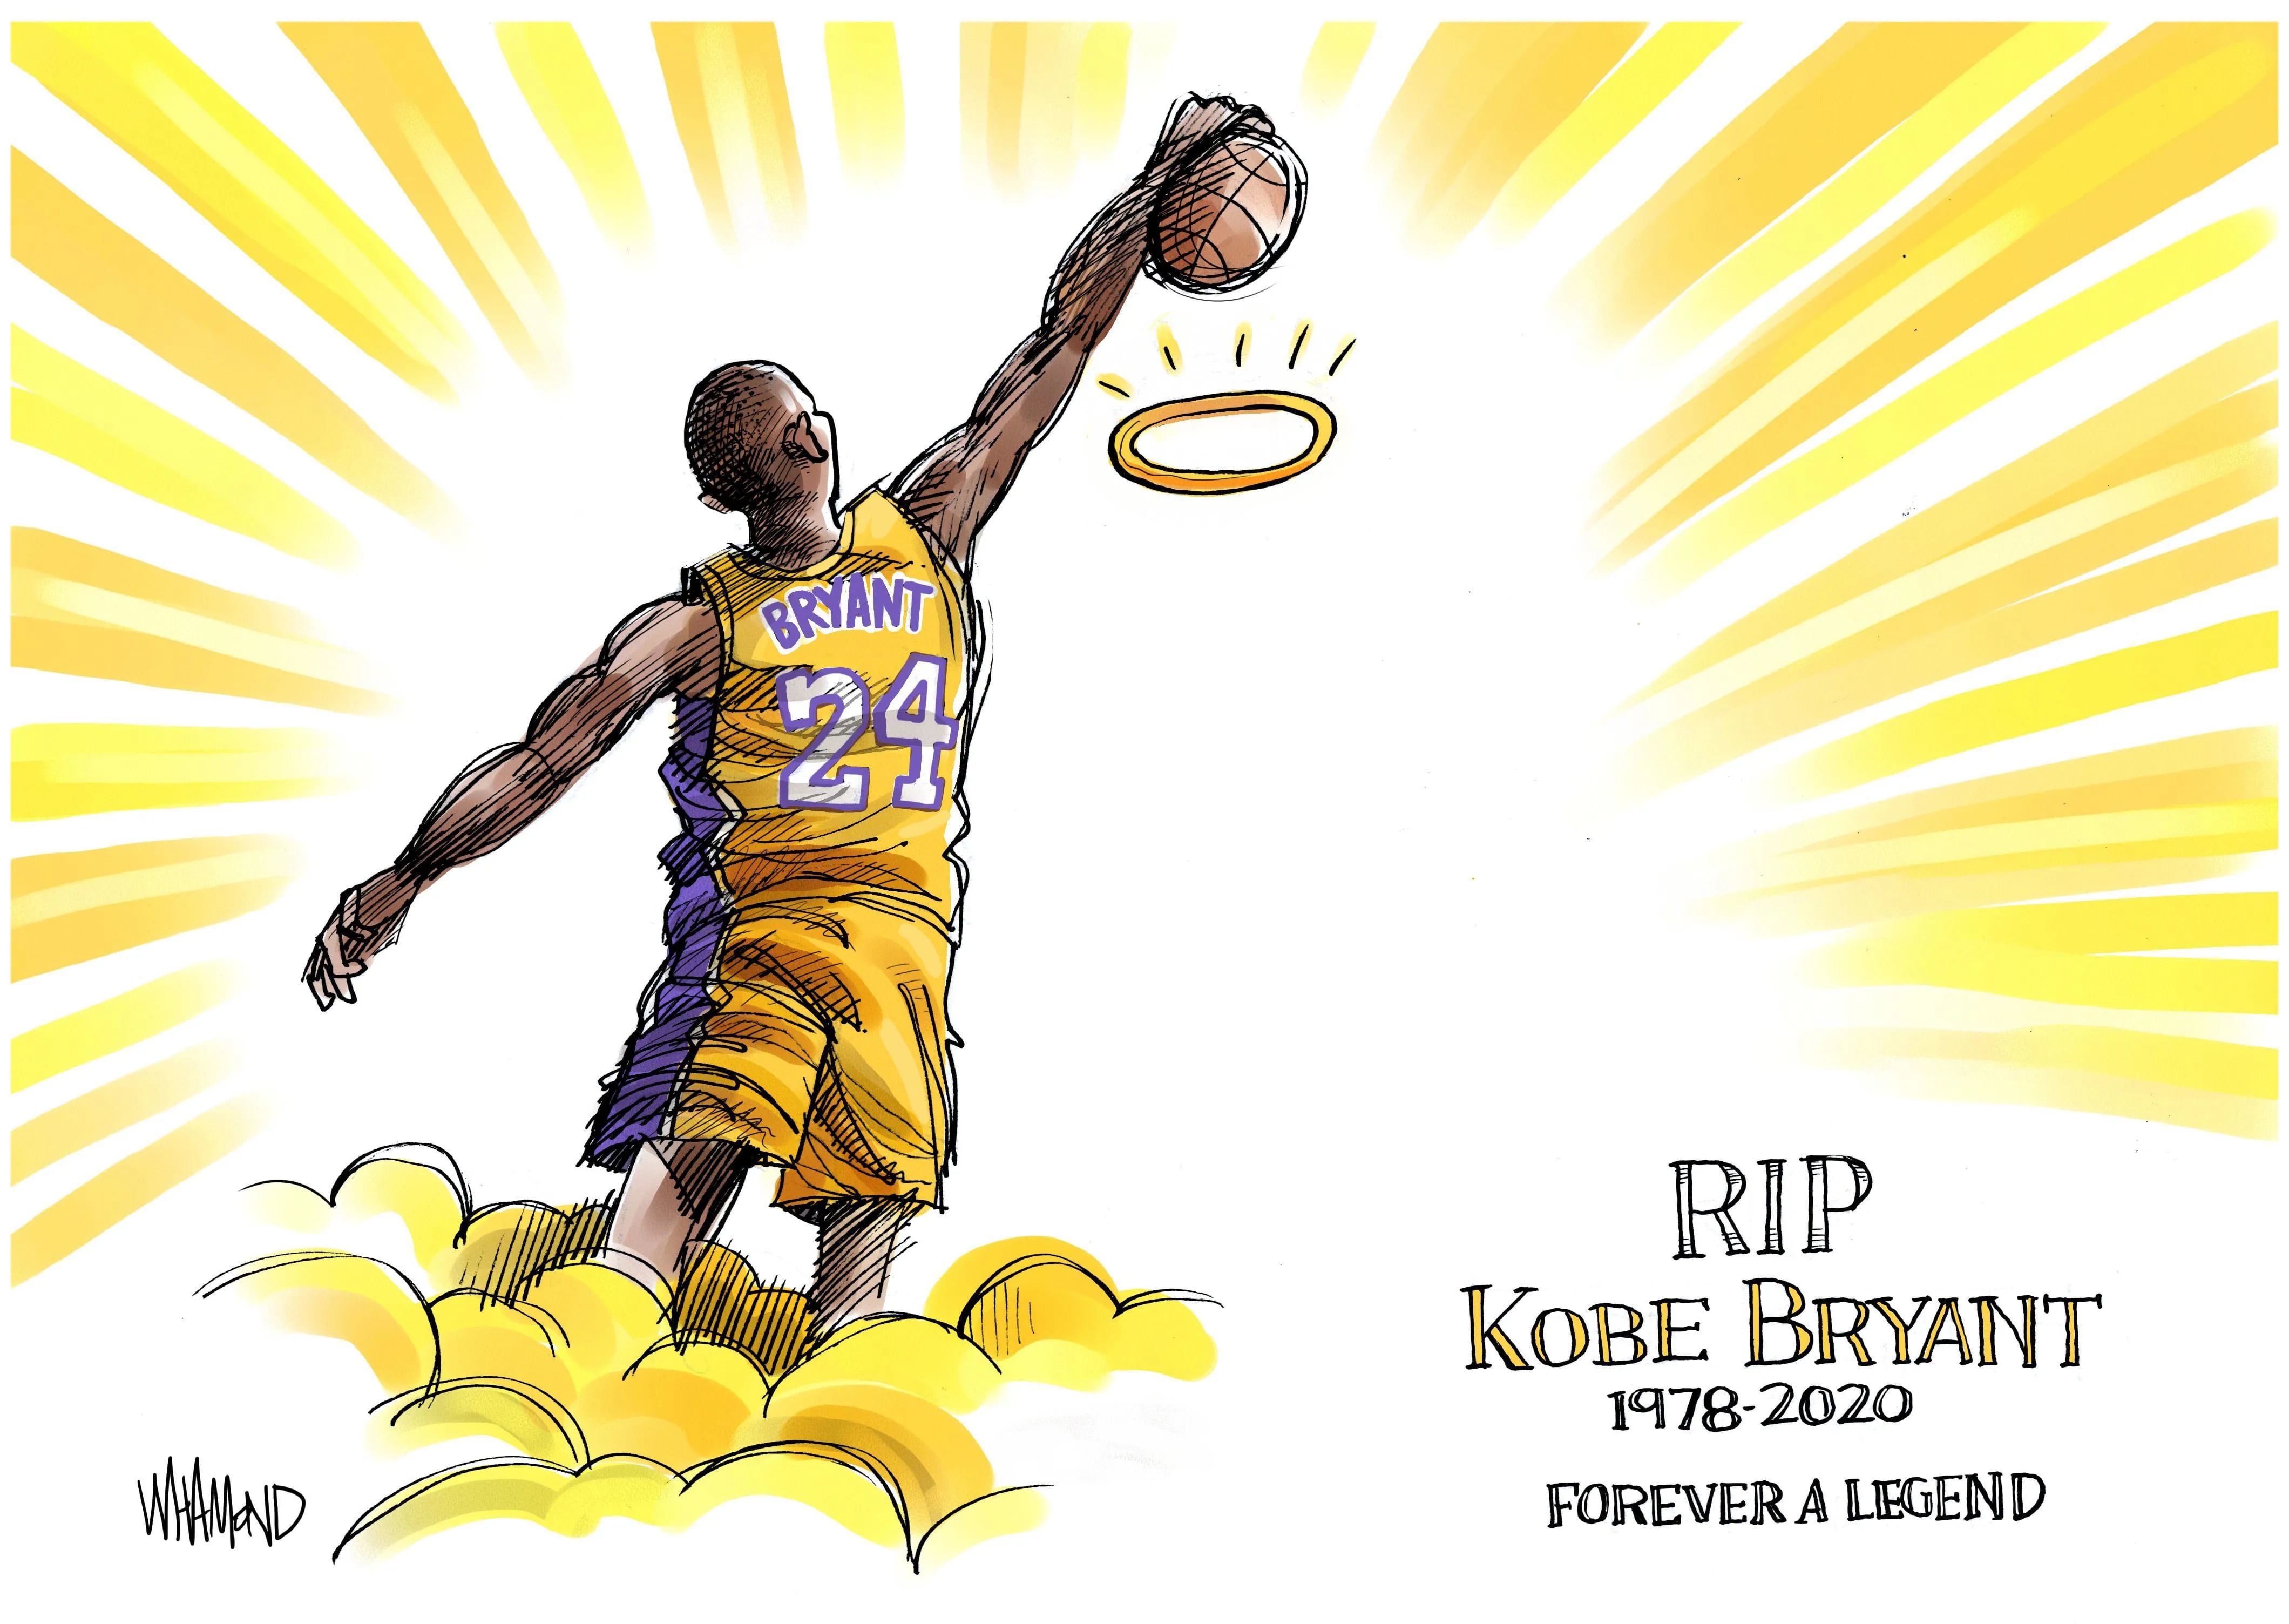 Cartoons: Kobe Bryant's death, memorialized by artists around the world |  Perspective